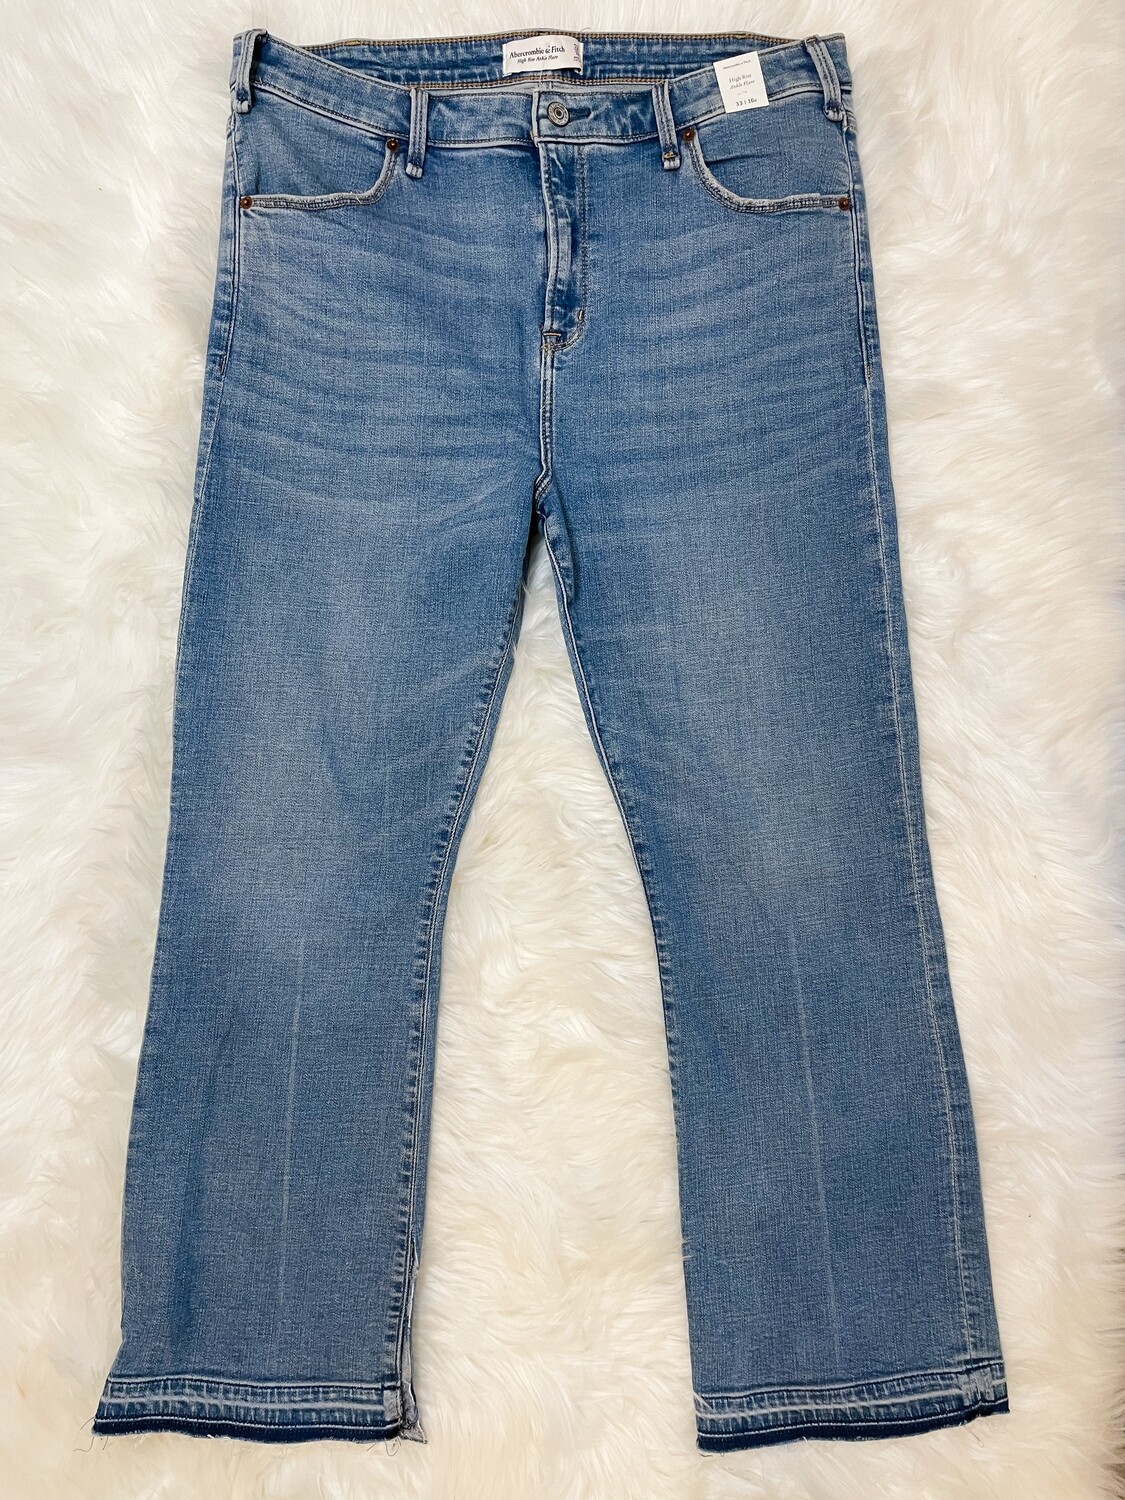 Abercrombie & Fitch High Rise Ankle Flare Jeans - Size 33